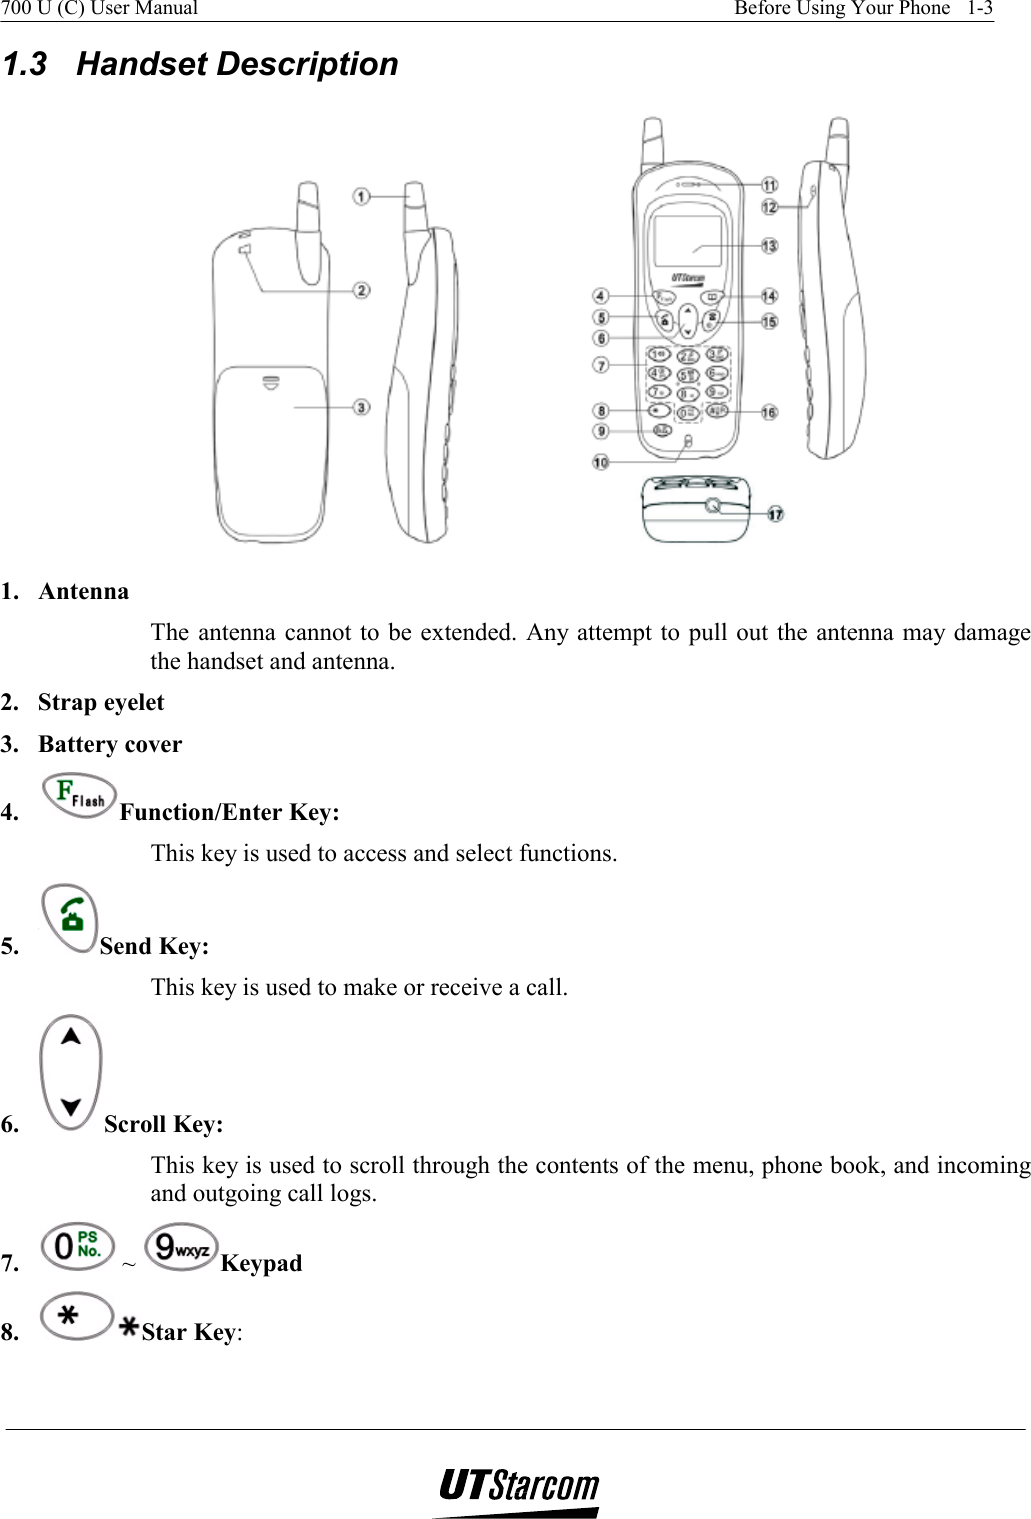 700 U (C) User Manual    Before Using Your Phone   1-3   1.3 Handset Description  1. Antenna The antenna cannot to be extended. Any attempt to pull out the antenna may damage the handset and antenna. 2. Strap eyelet 3. Battery cover 4.  Function/Enter Key:  This key is used to access and select functions. 5.  Send Key: This key is used to make or receive a call. 6.  Scroll Key: This key is used to scroll through the contents of the menu, phone book, and incoming and outgoing call logs. 7.   ~  Keypad 8.  Star Key: 